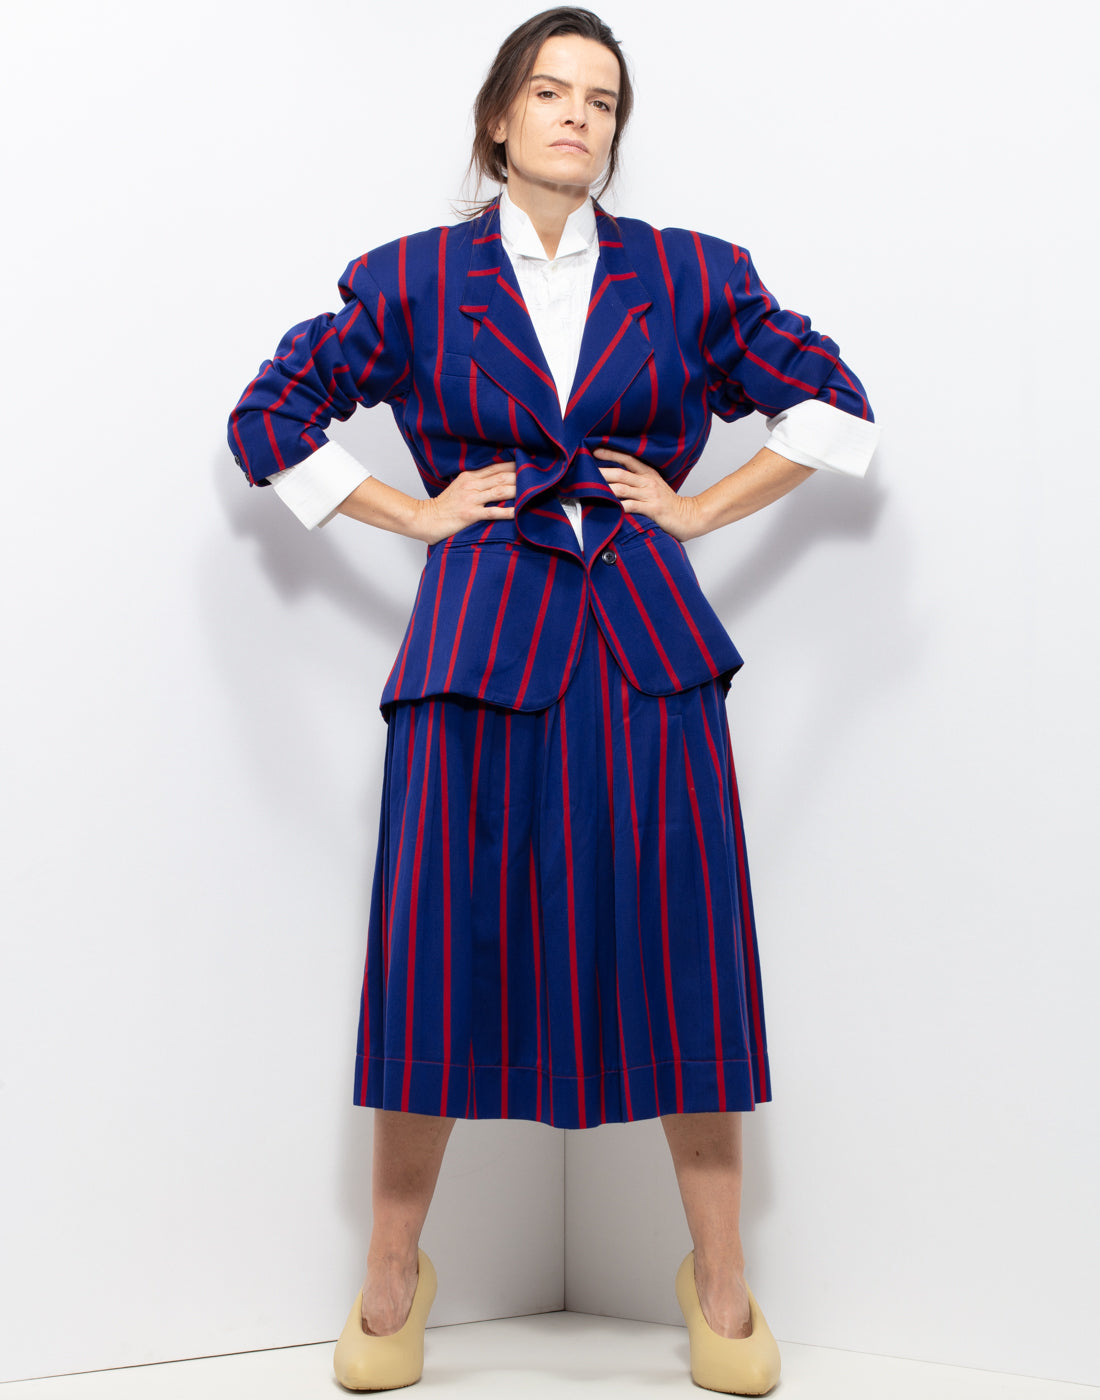 Funky Striped Skirt Suit